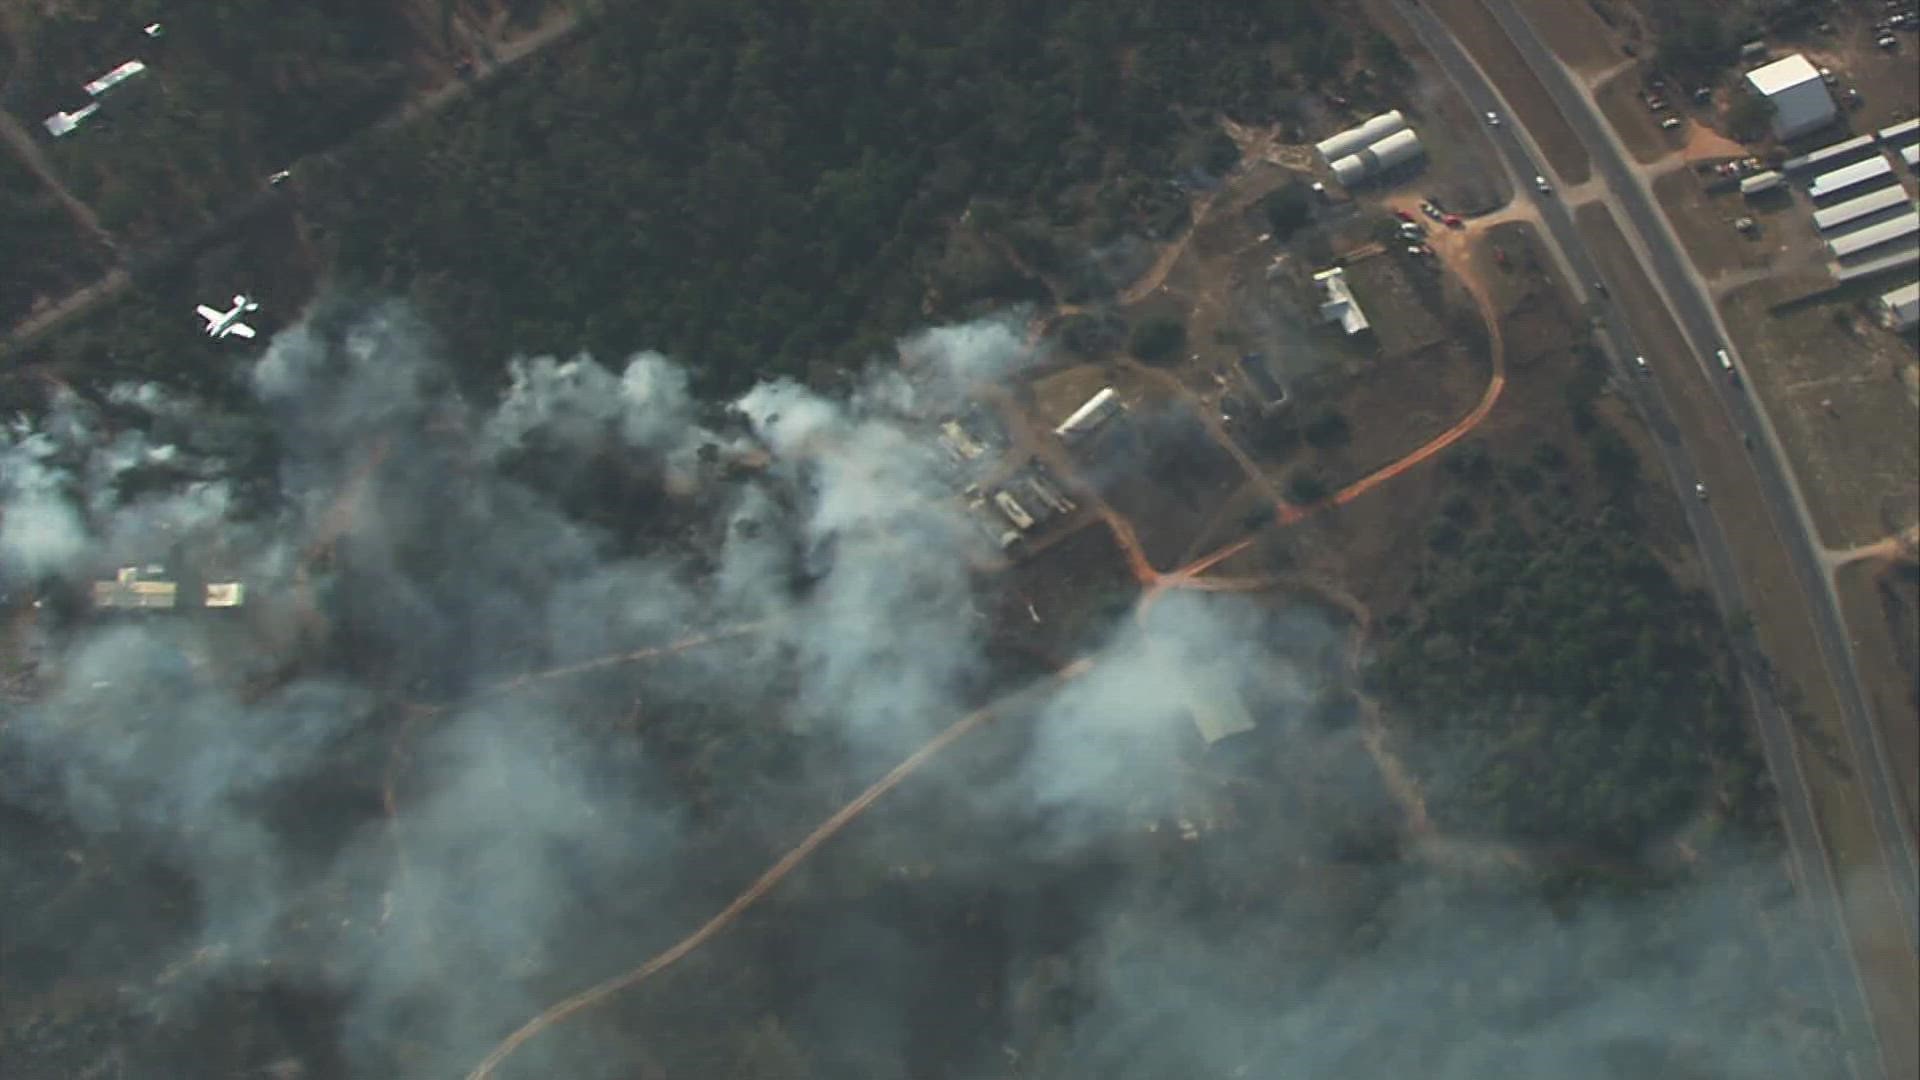 Aerial video of the Bastrop County wildfire shows the extent of the damage from the fire, which is about 30 percent contained Wednesday afternoon.